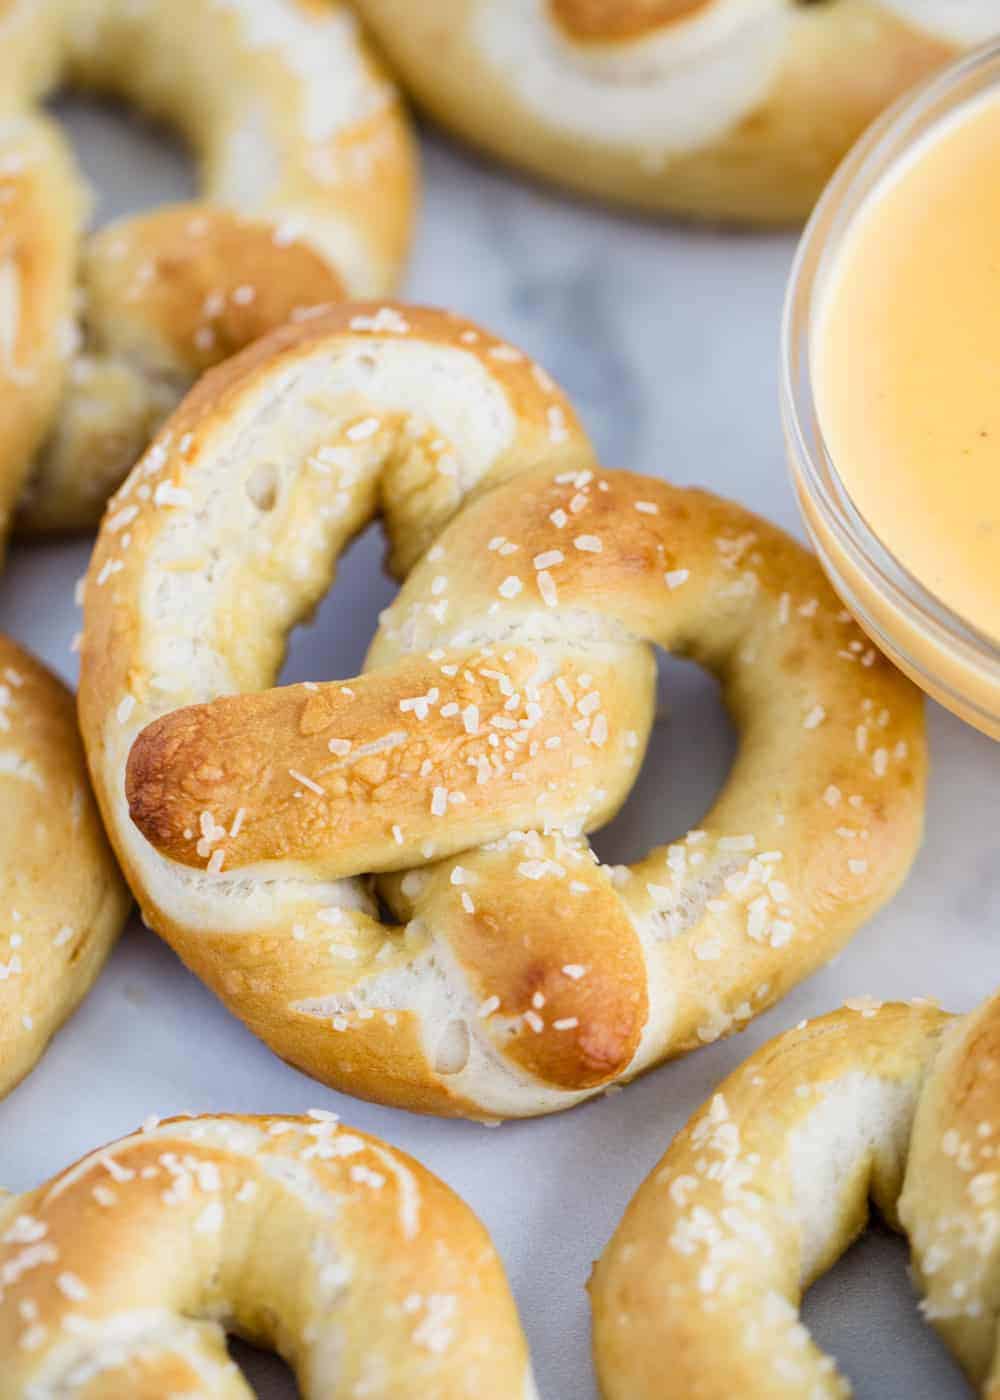 Soft pretzels with cheese sauce.